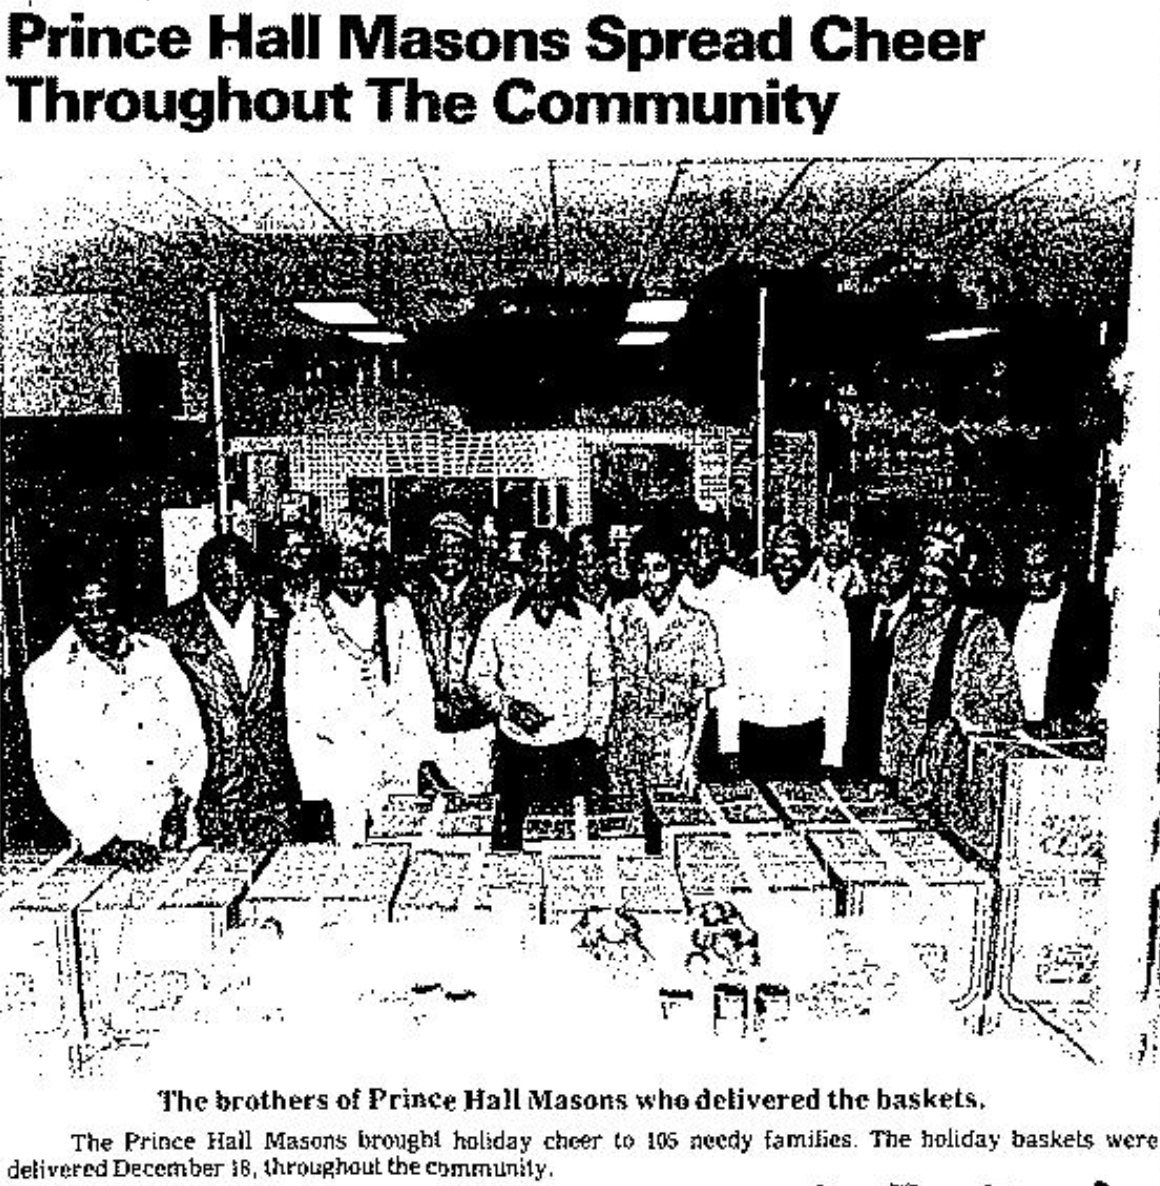 This December 30, 1982 Omaha Star pic shows "Prince Hall Masons Spread Cheer Throughout The Community" in North Omaha